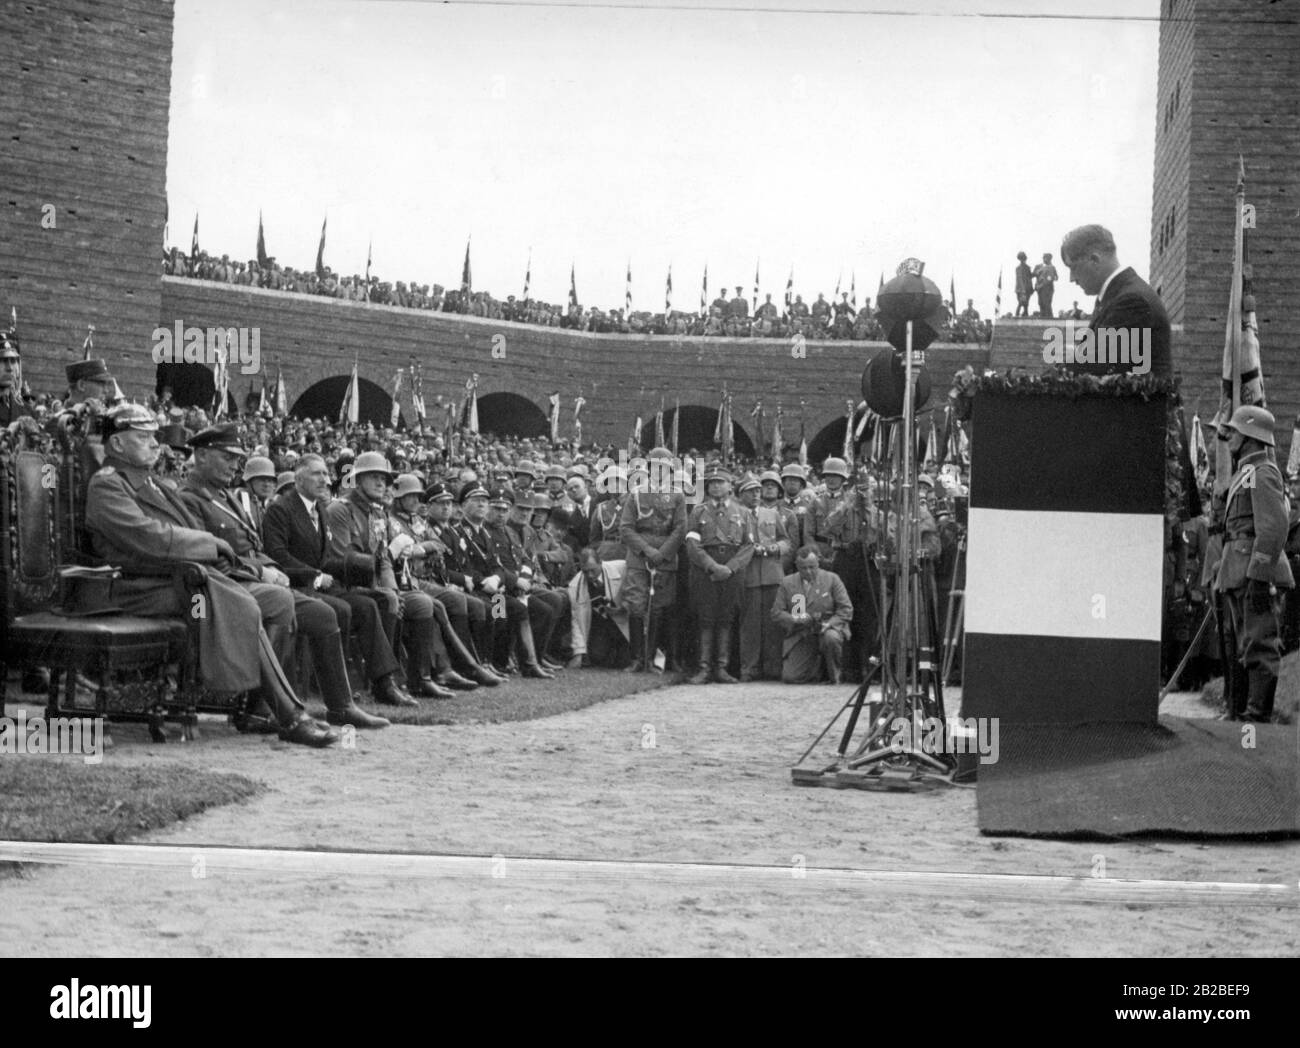 Speech of Chancellor Adolf Hitler at the inauguration of the Tannenberg Memorial in 1933 near Hohenstein, East Prussia (today Osztynek, Poland). In the first row sit (from left) Reich President Paul von Hindenburg, Hermann Goering, Vice-Chancellor Franz von Papen and Reichswehr Minister Werner von Blomberg. In the middle of the picture, left beside a kneeling photographer, Heinrich Hoffmann. Stock Photo